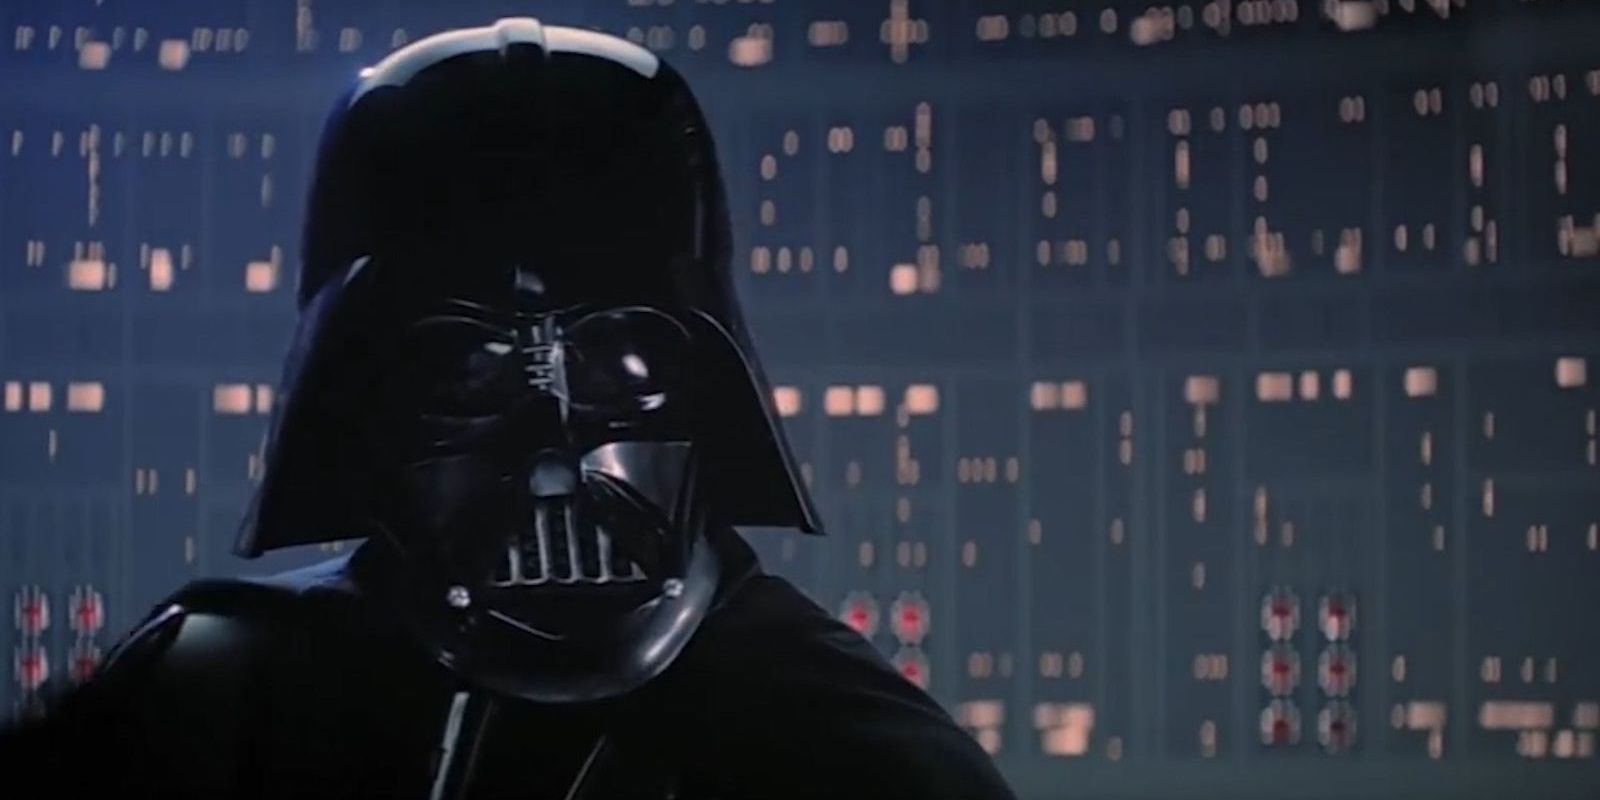 Darth Vader Had Second Thoughts About Turning Luke To The Dark Side